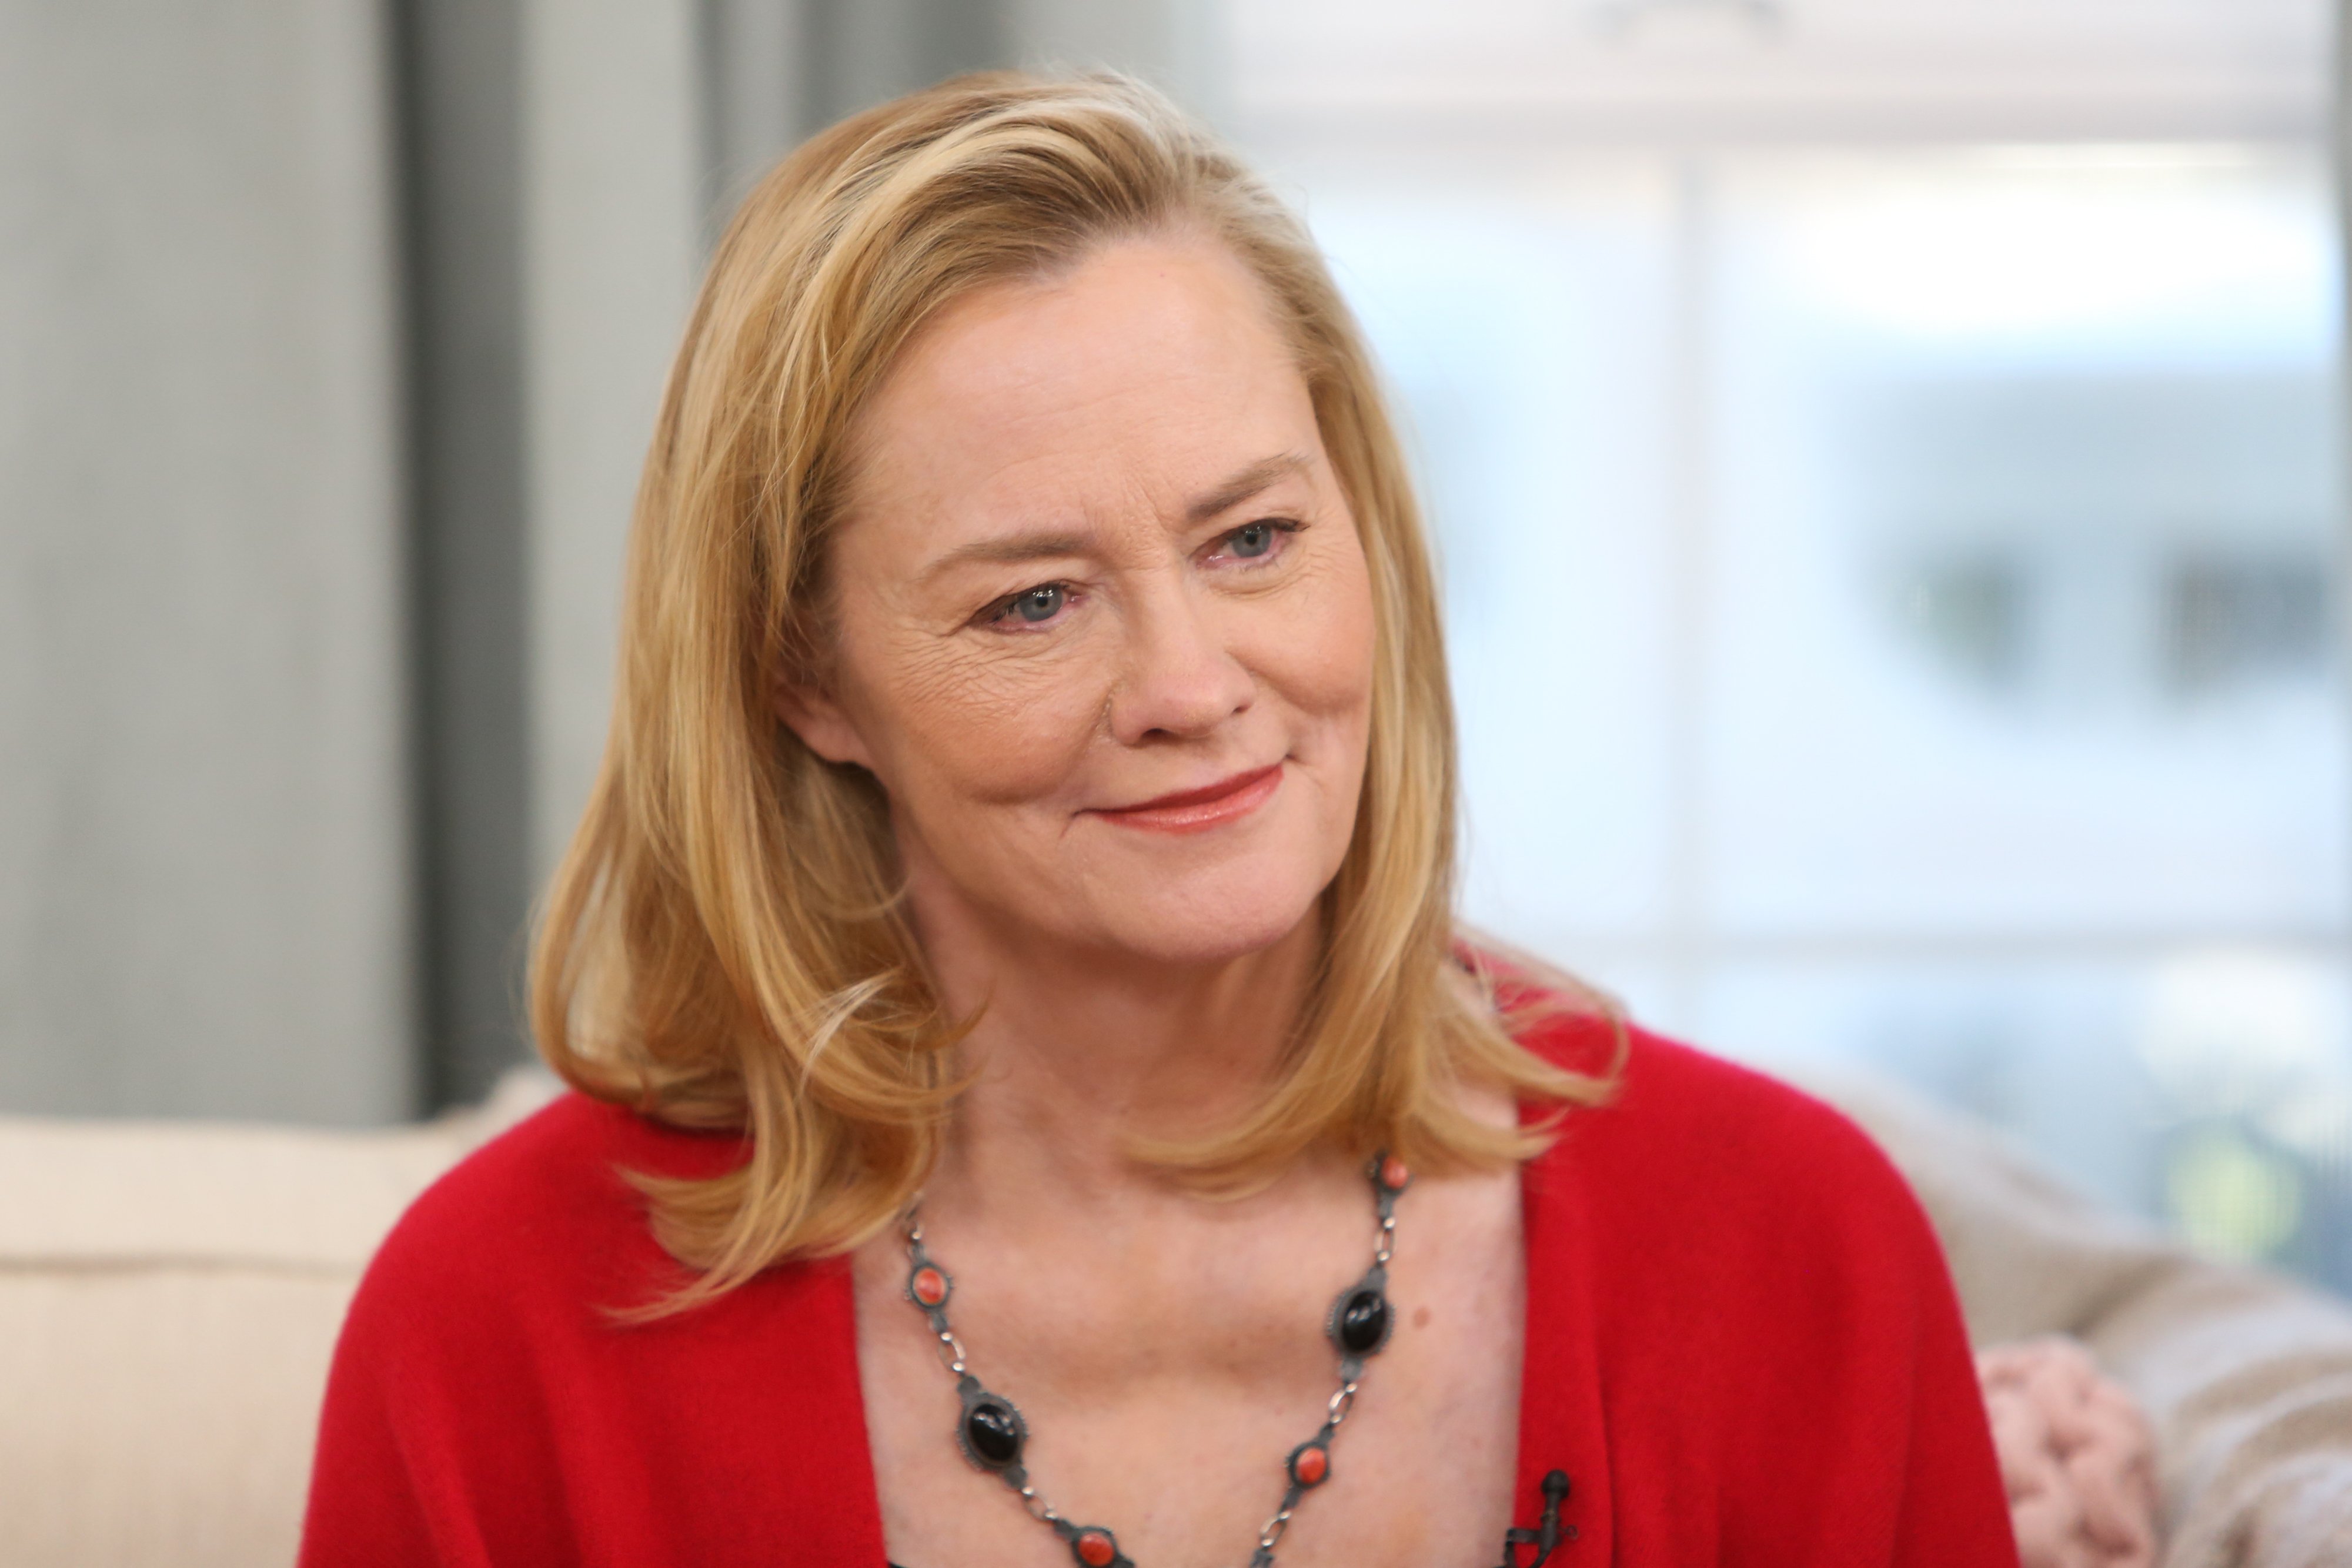  Cybill Shepherd visits Hallmark's "Home & Family" at Universal Studios Hollywood on January 25, 2019  | Photo: Getty Images